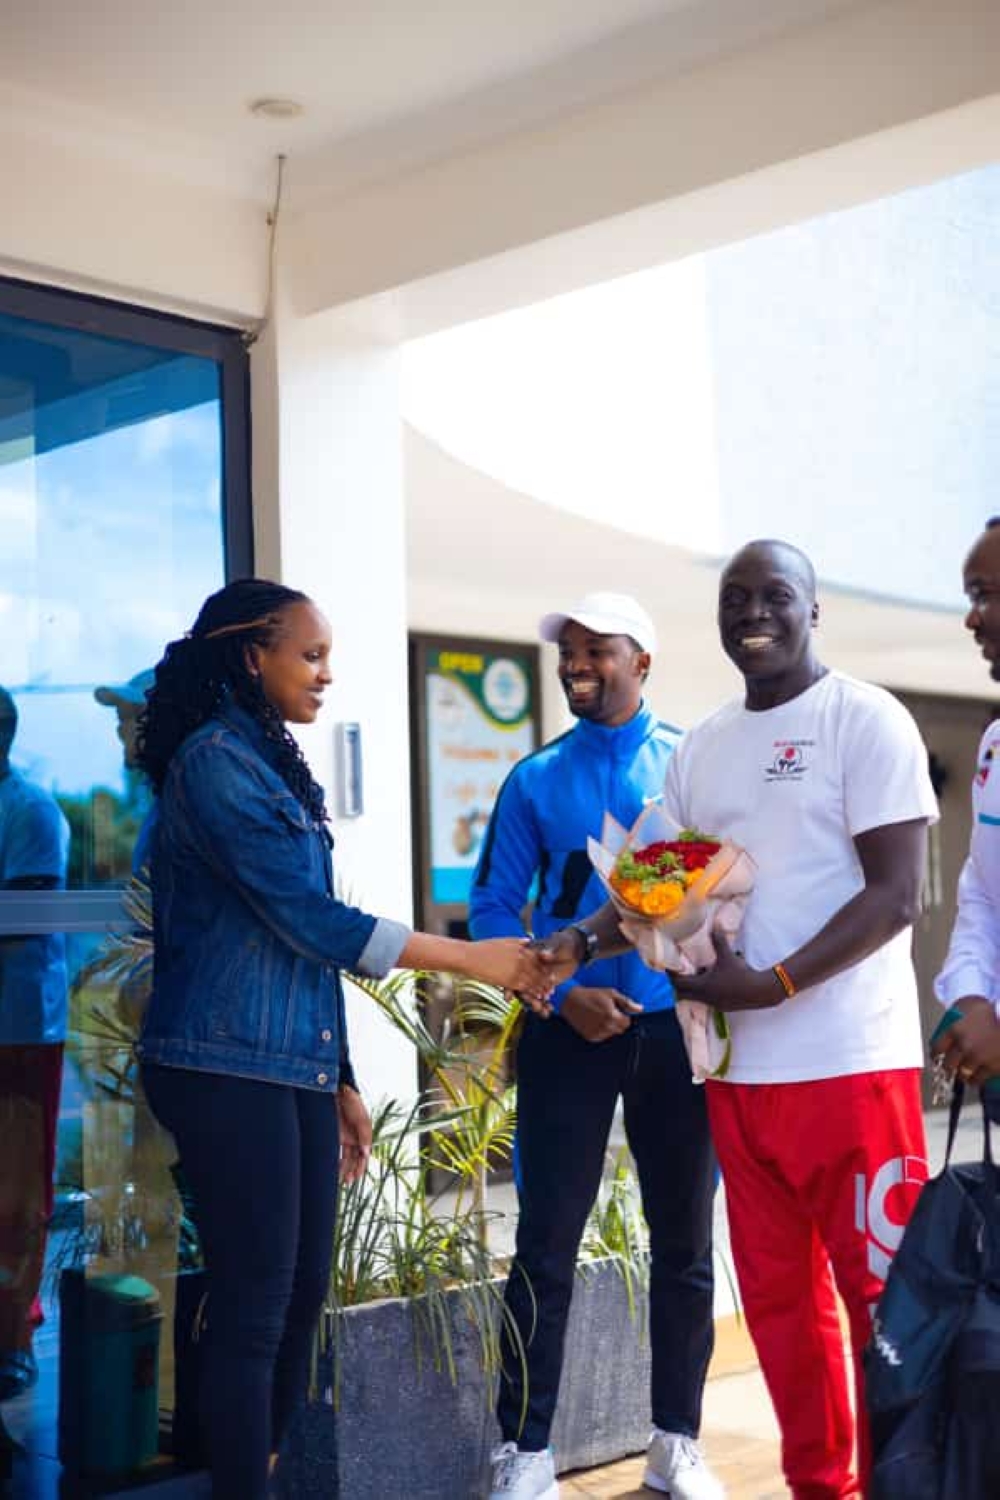 Christine Ingabire, one of the female karate practitioners in Kigali, shares a light moment with James Opiyo after welcoming him to Rwanda on Friday, April 28.